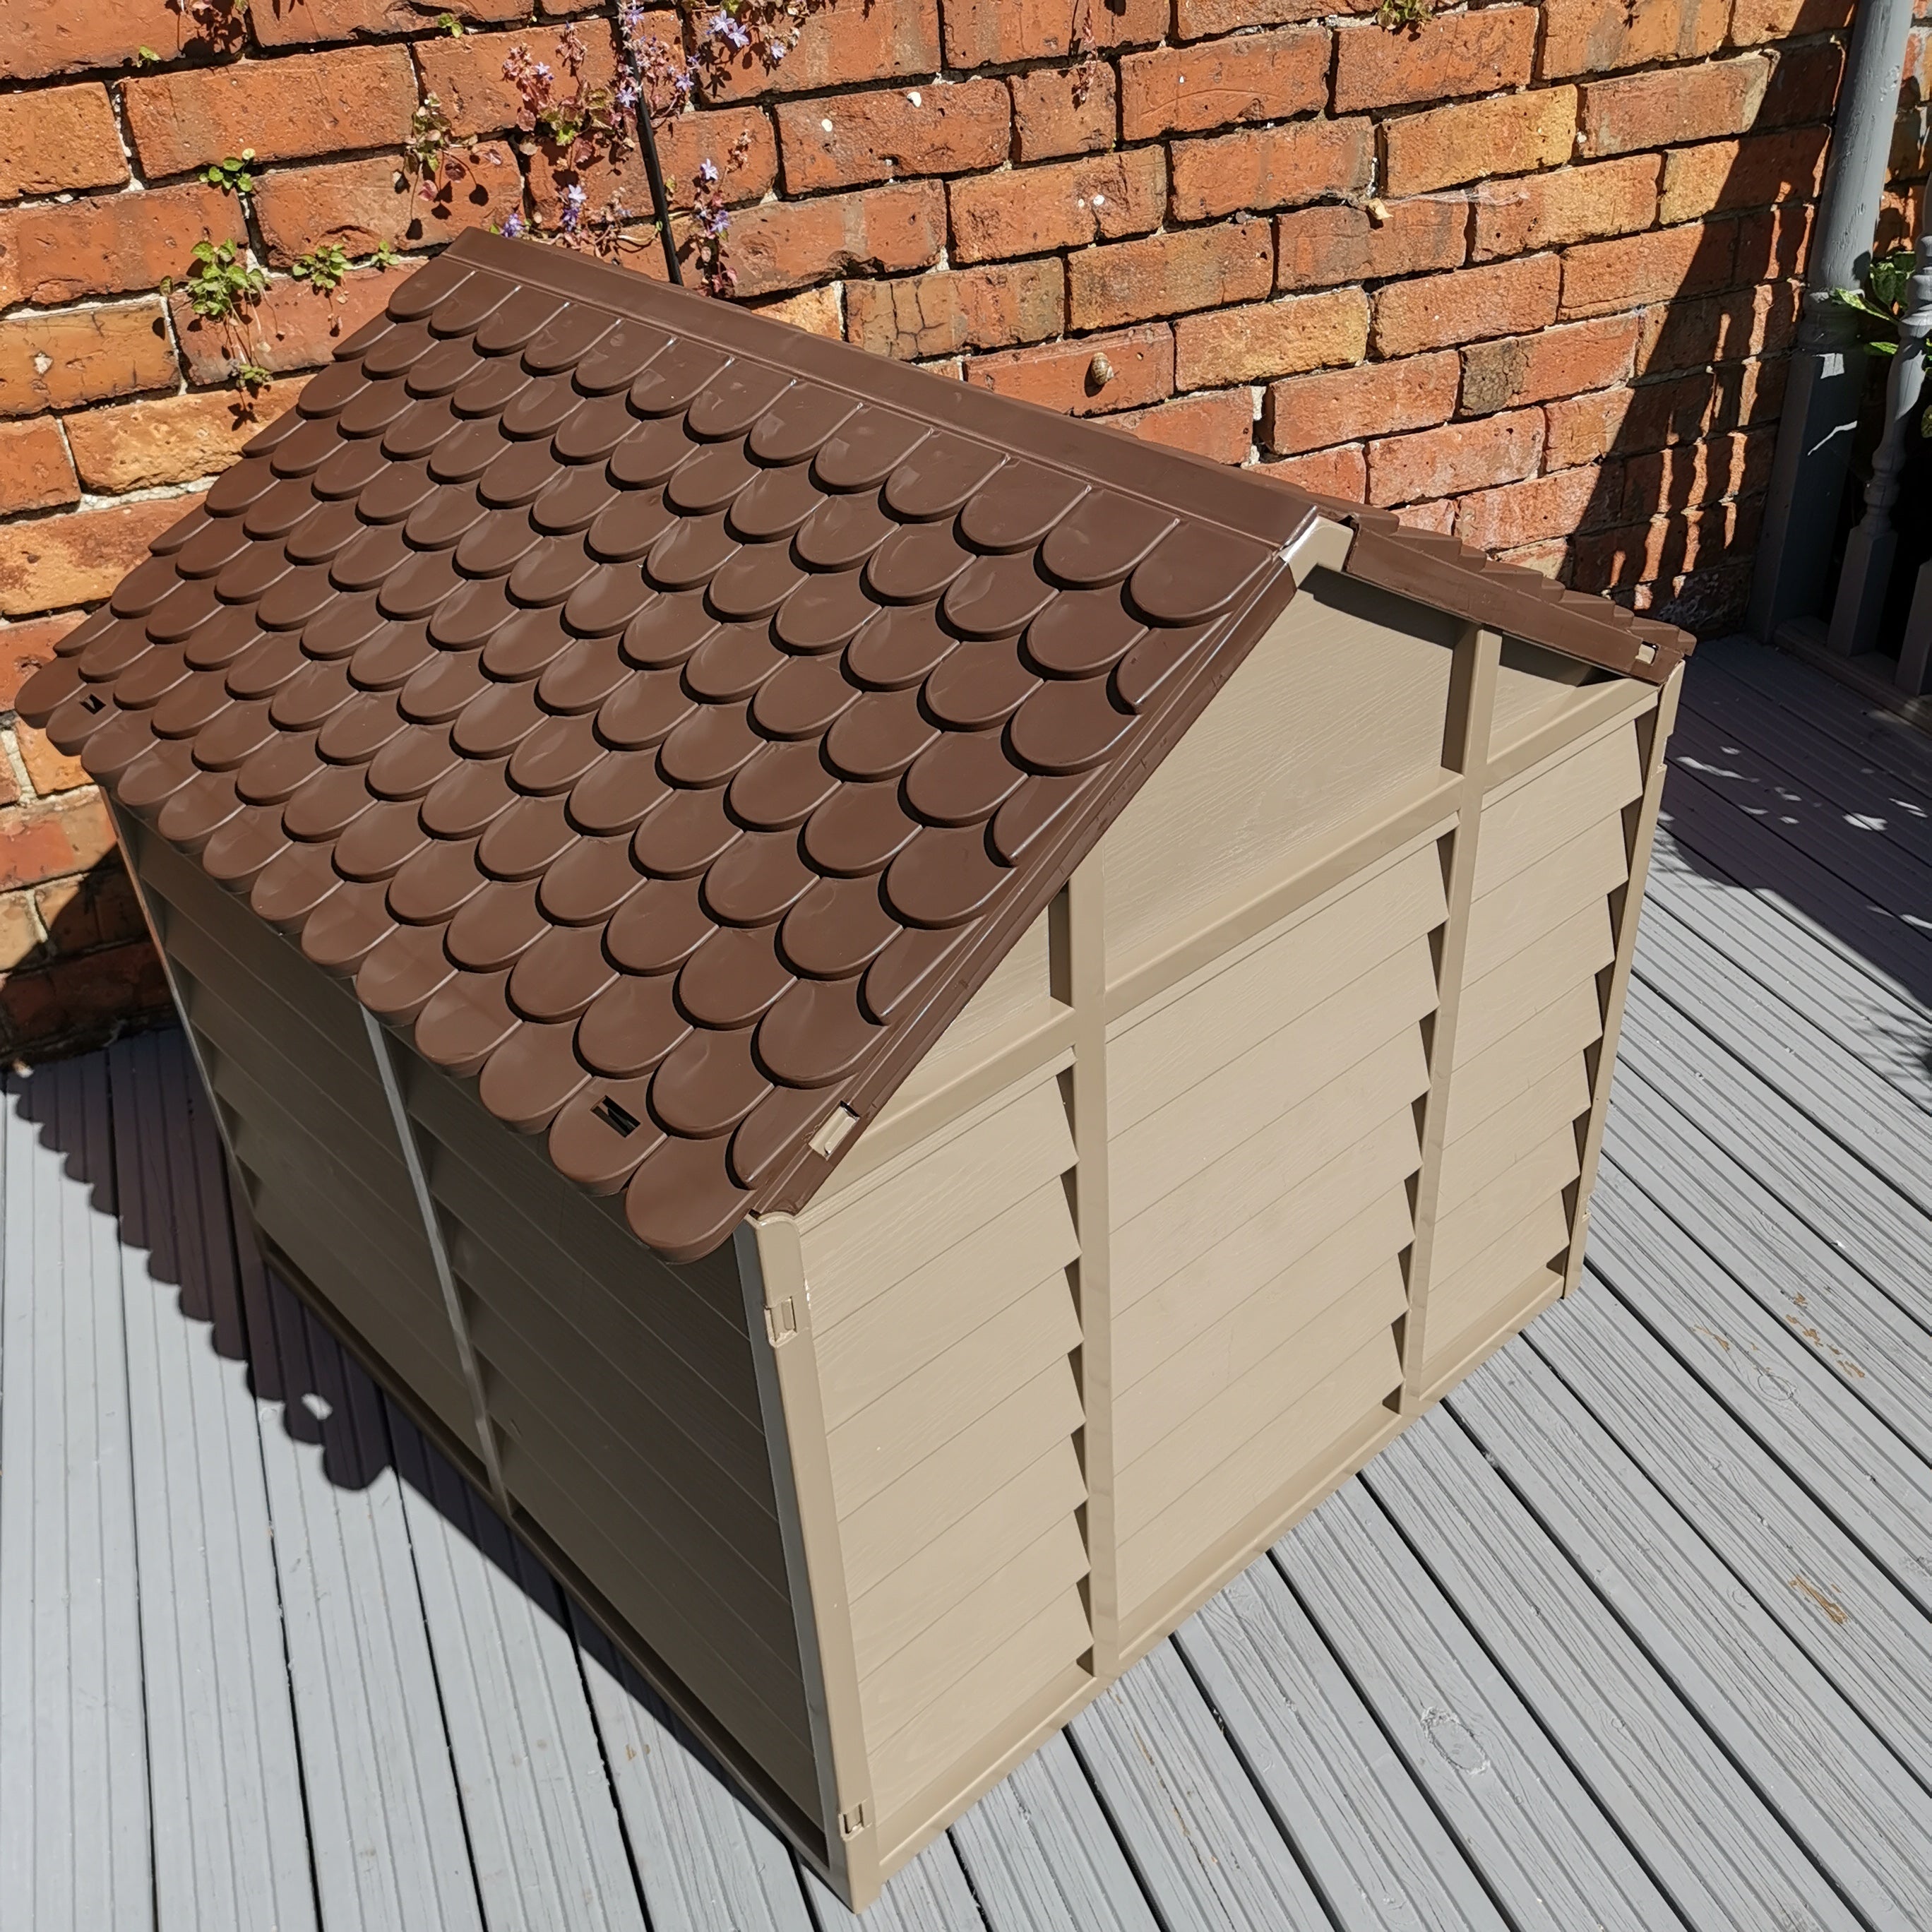 Large Plastic Dog Kennel / House in Brown – 86cm x 84cm x 82cm